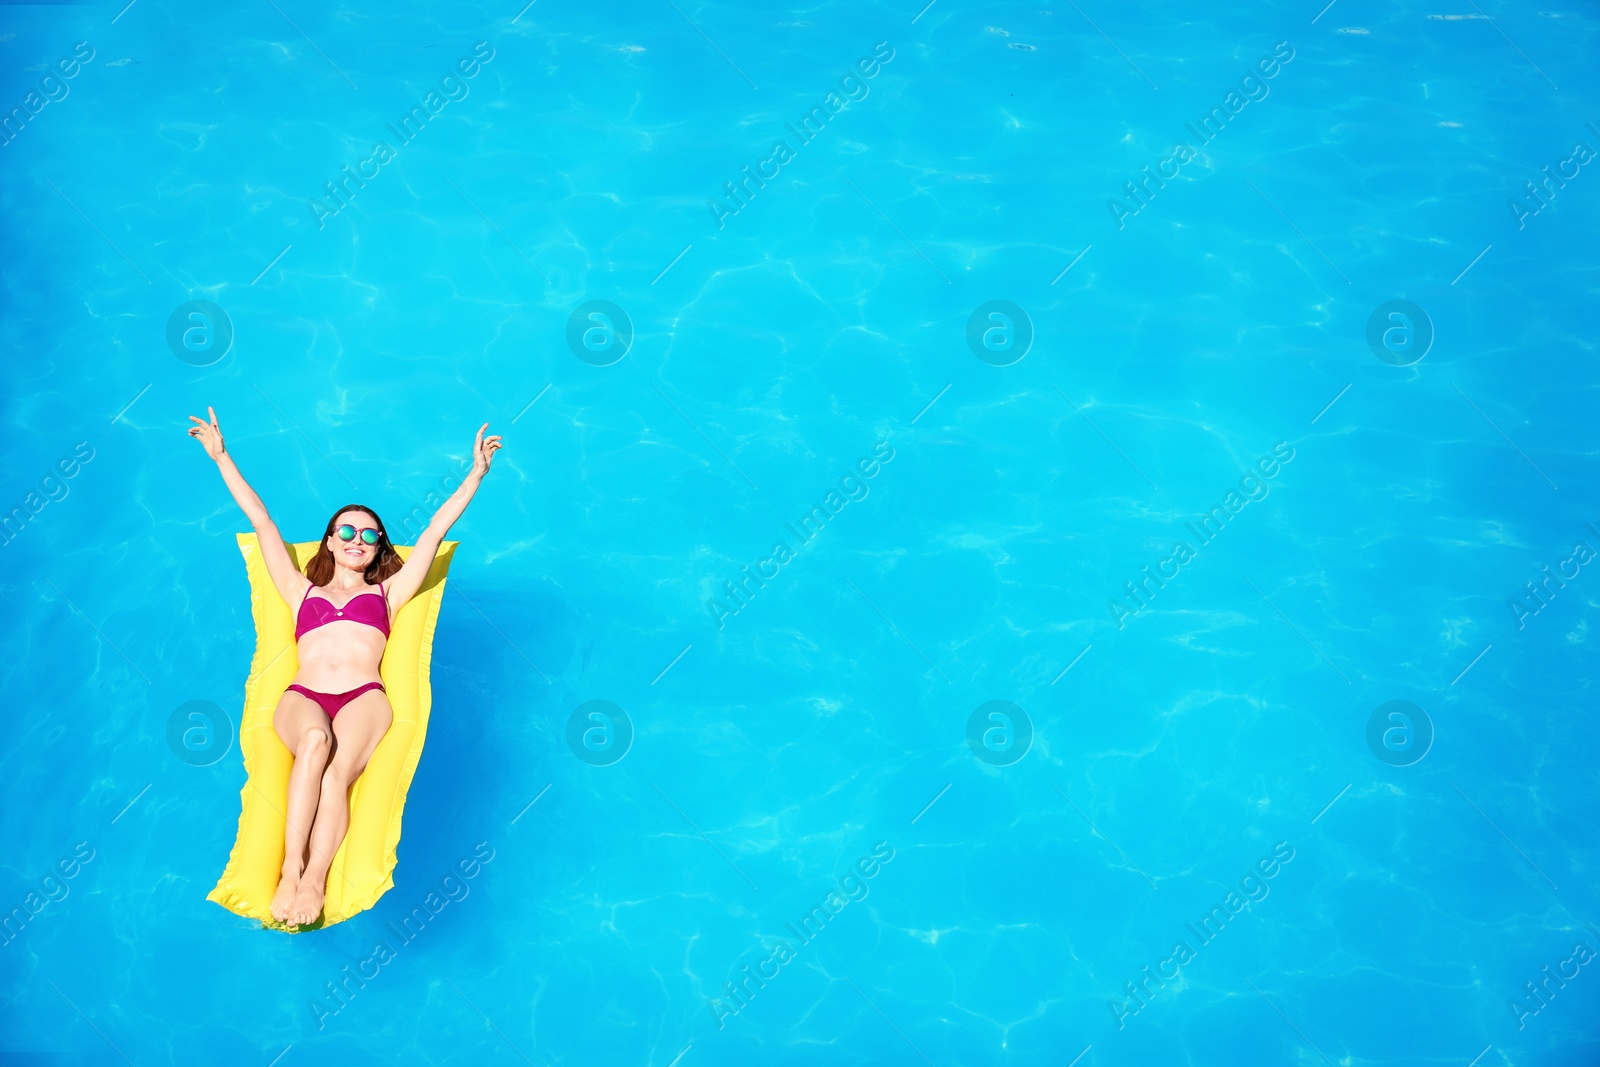 Photo of Young woman on inflatable mattress in swimming pool, above view